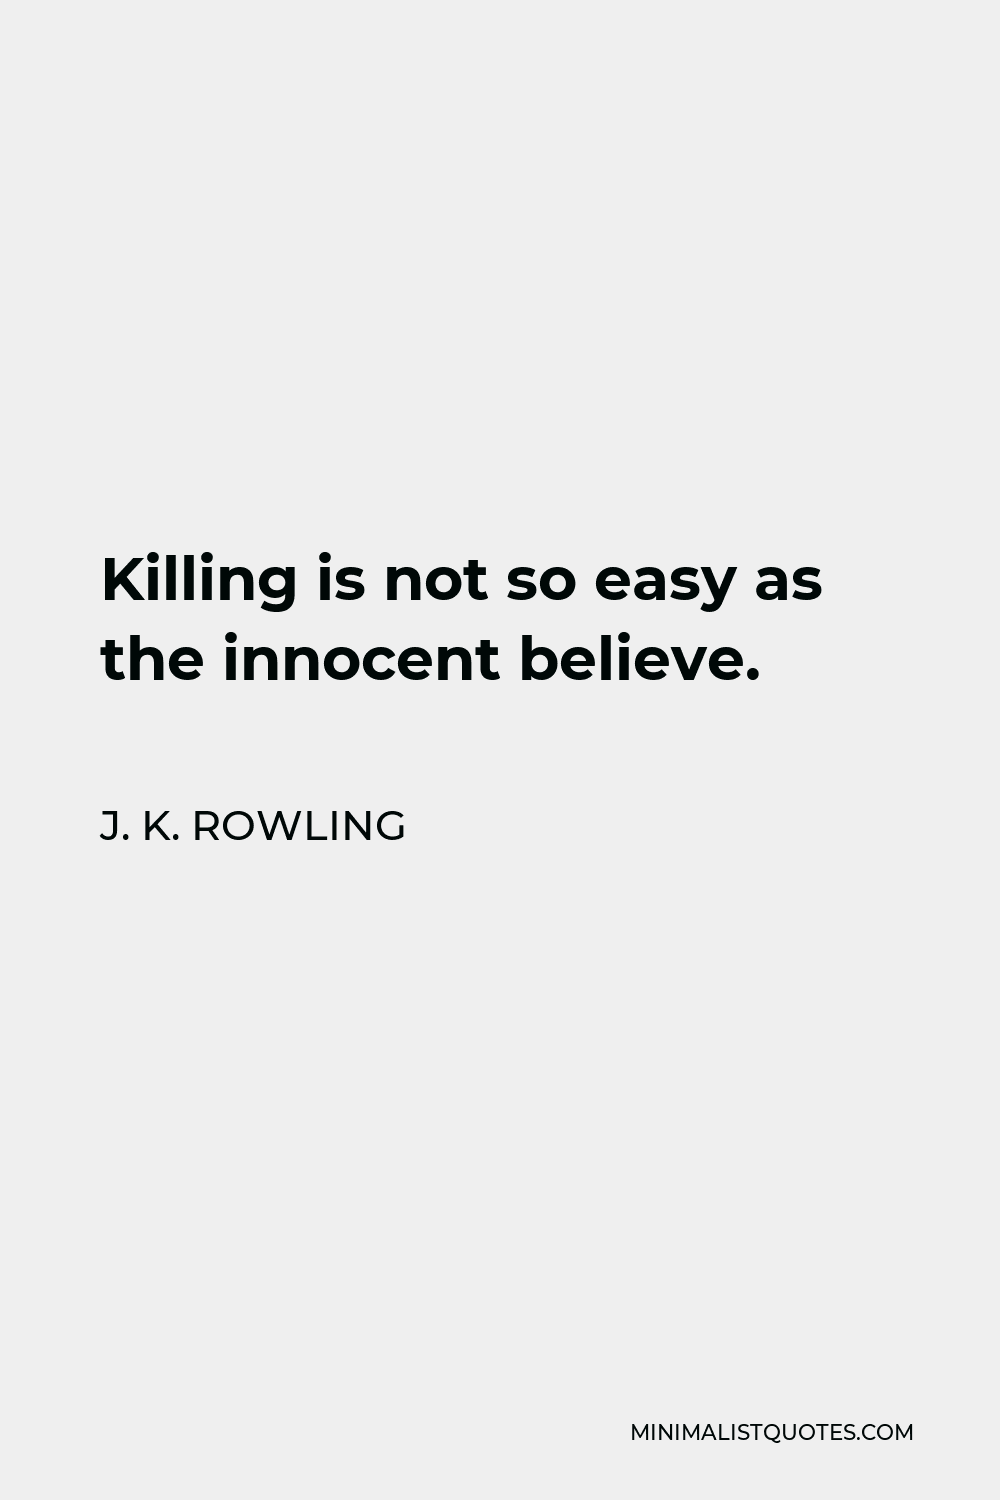 J. K. Rowling Quote - Killing is not so easy as the innocent believe.